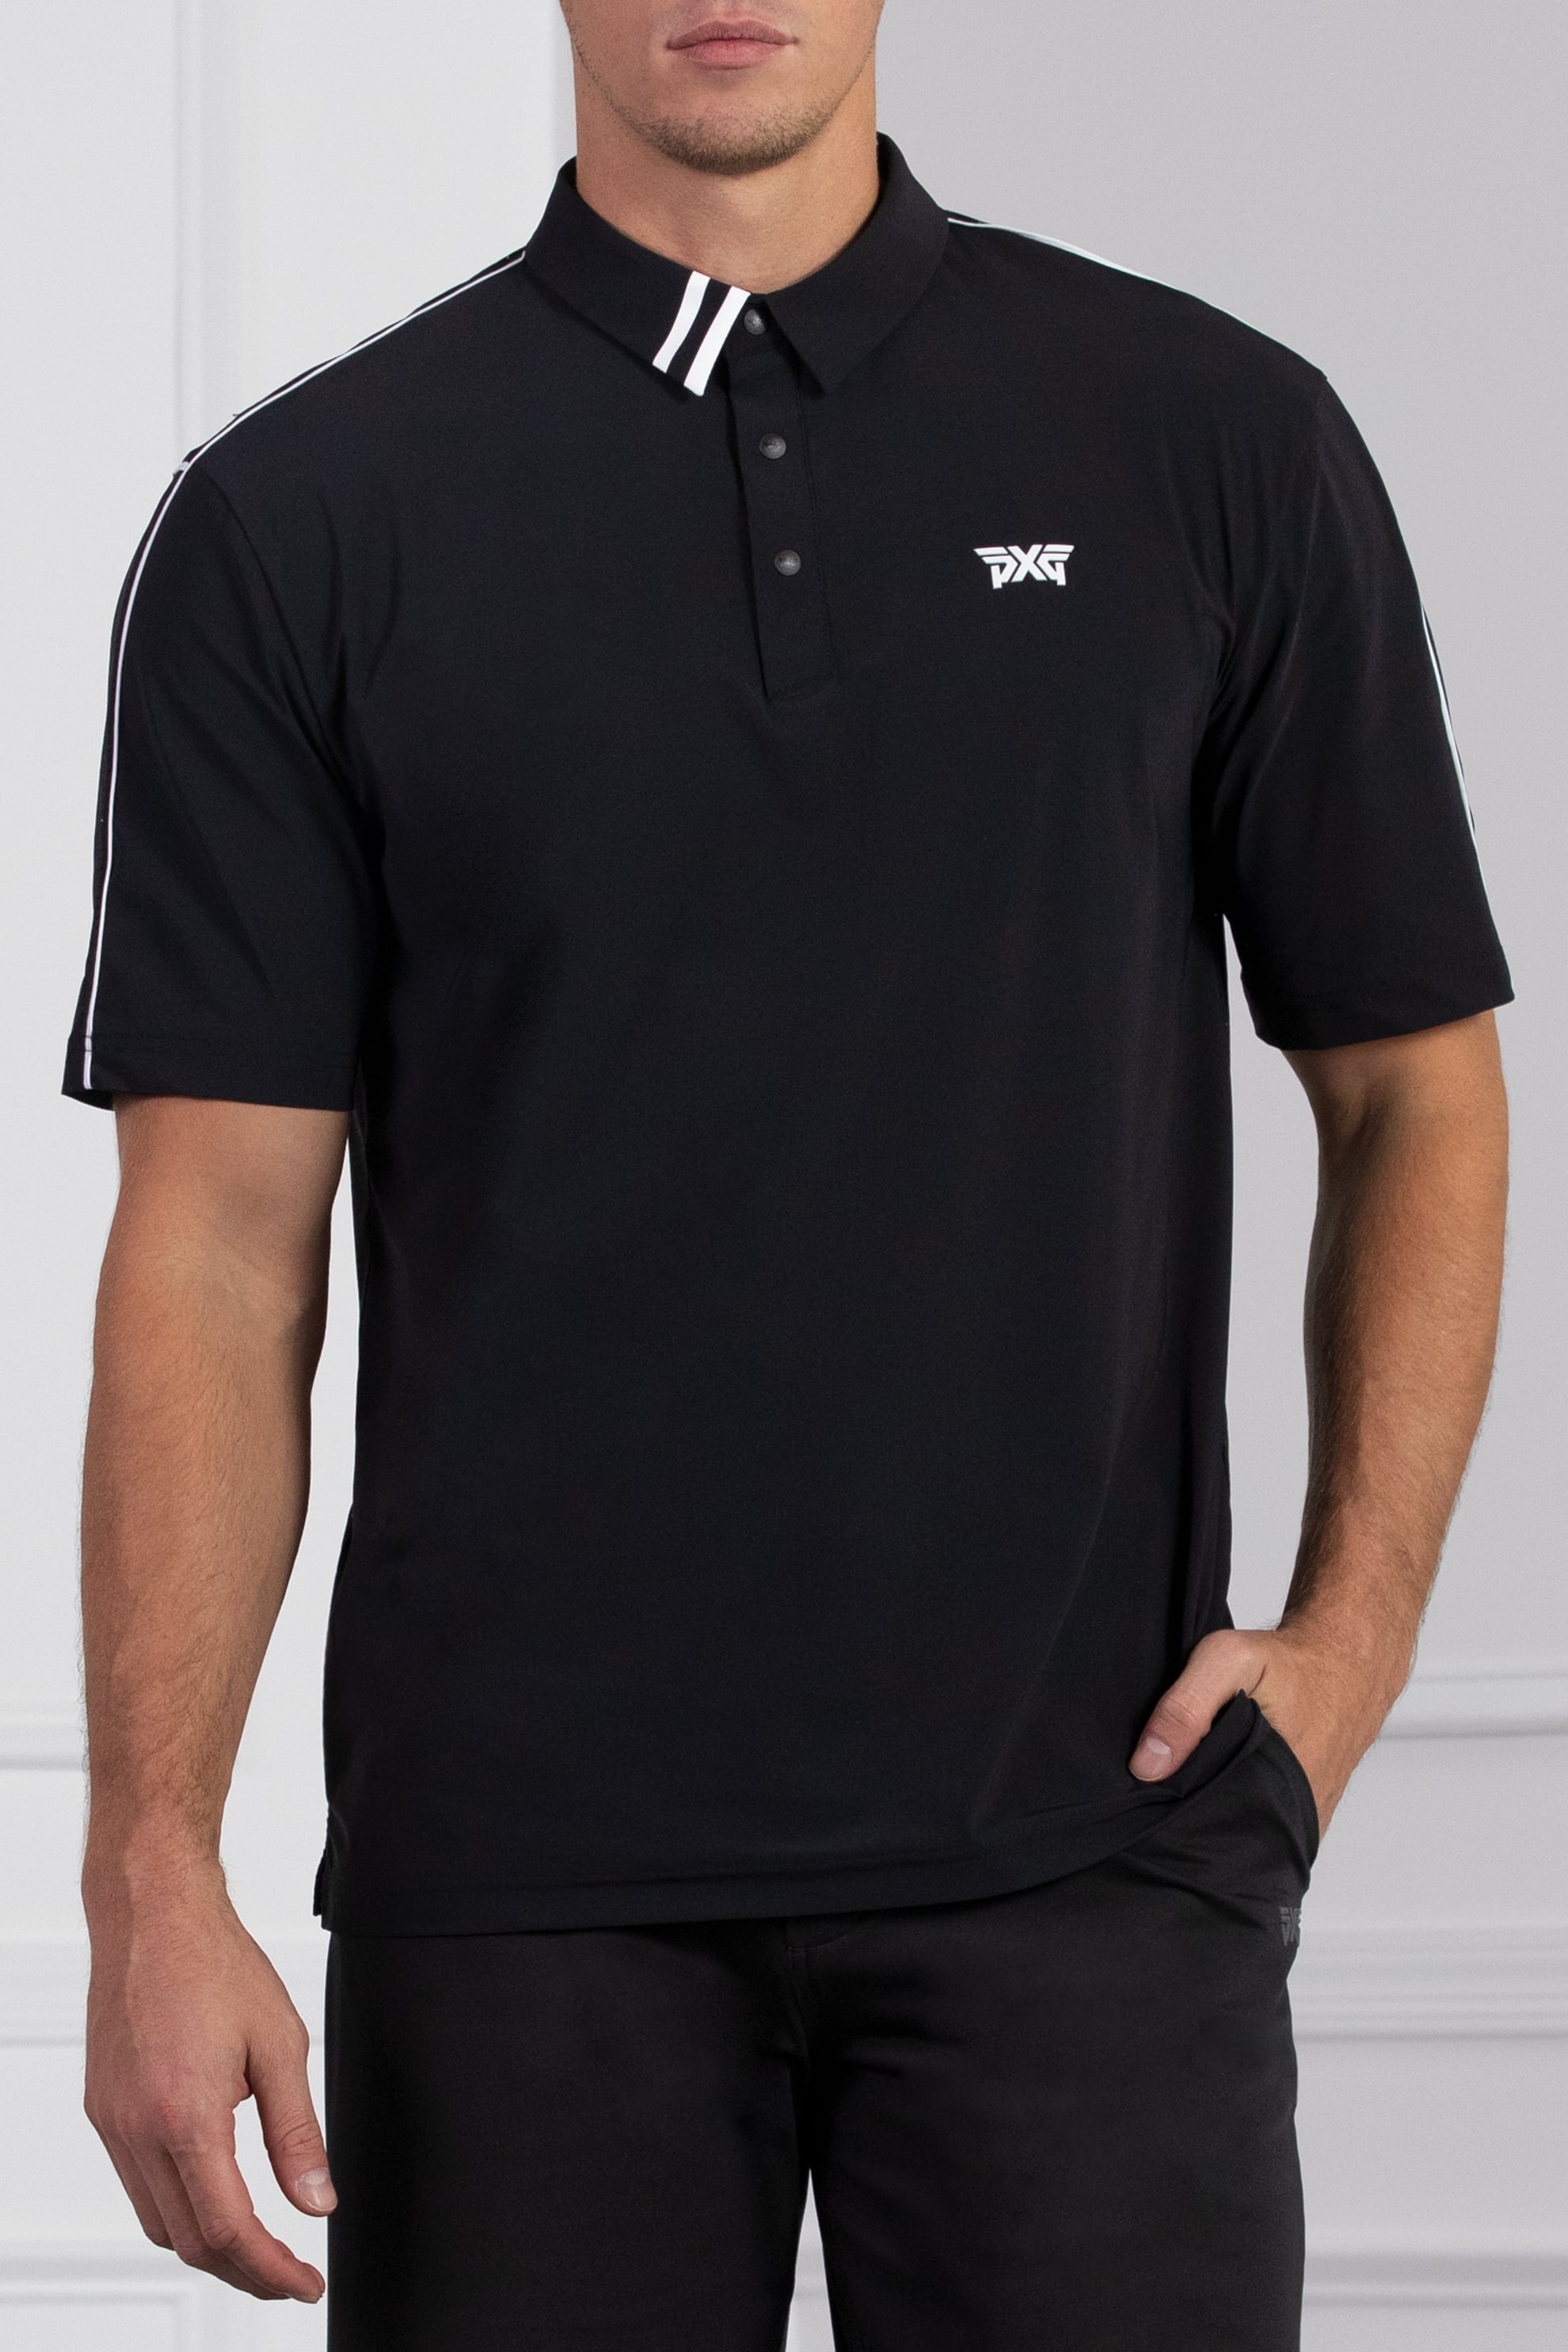 Comfort Fit Fineline Polo | Shop the Highest Quality Golf Apparel, Gear,  Accessories and Golf Clubs at PXG | Poloshirts